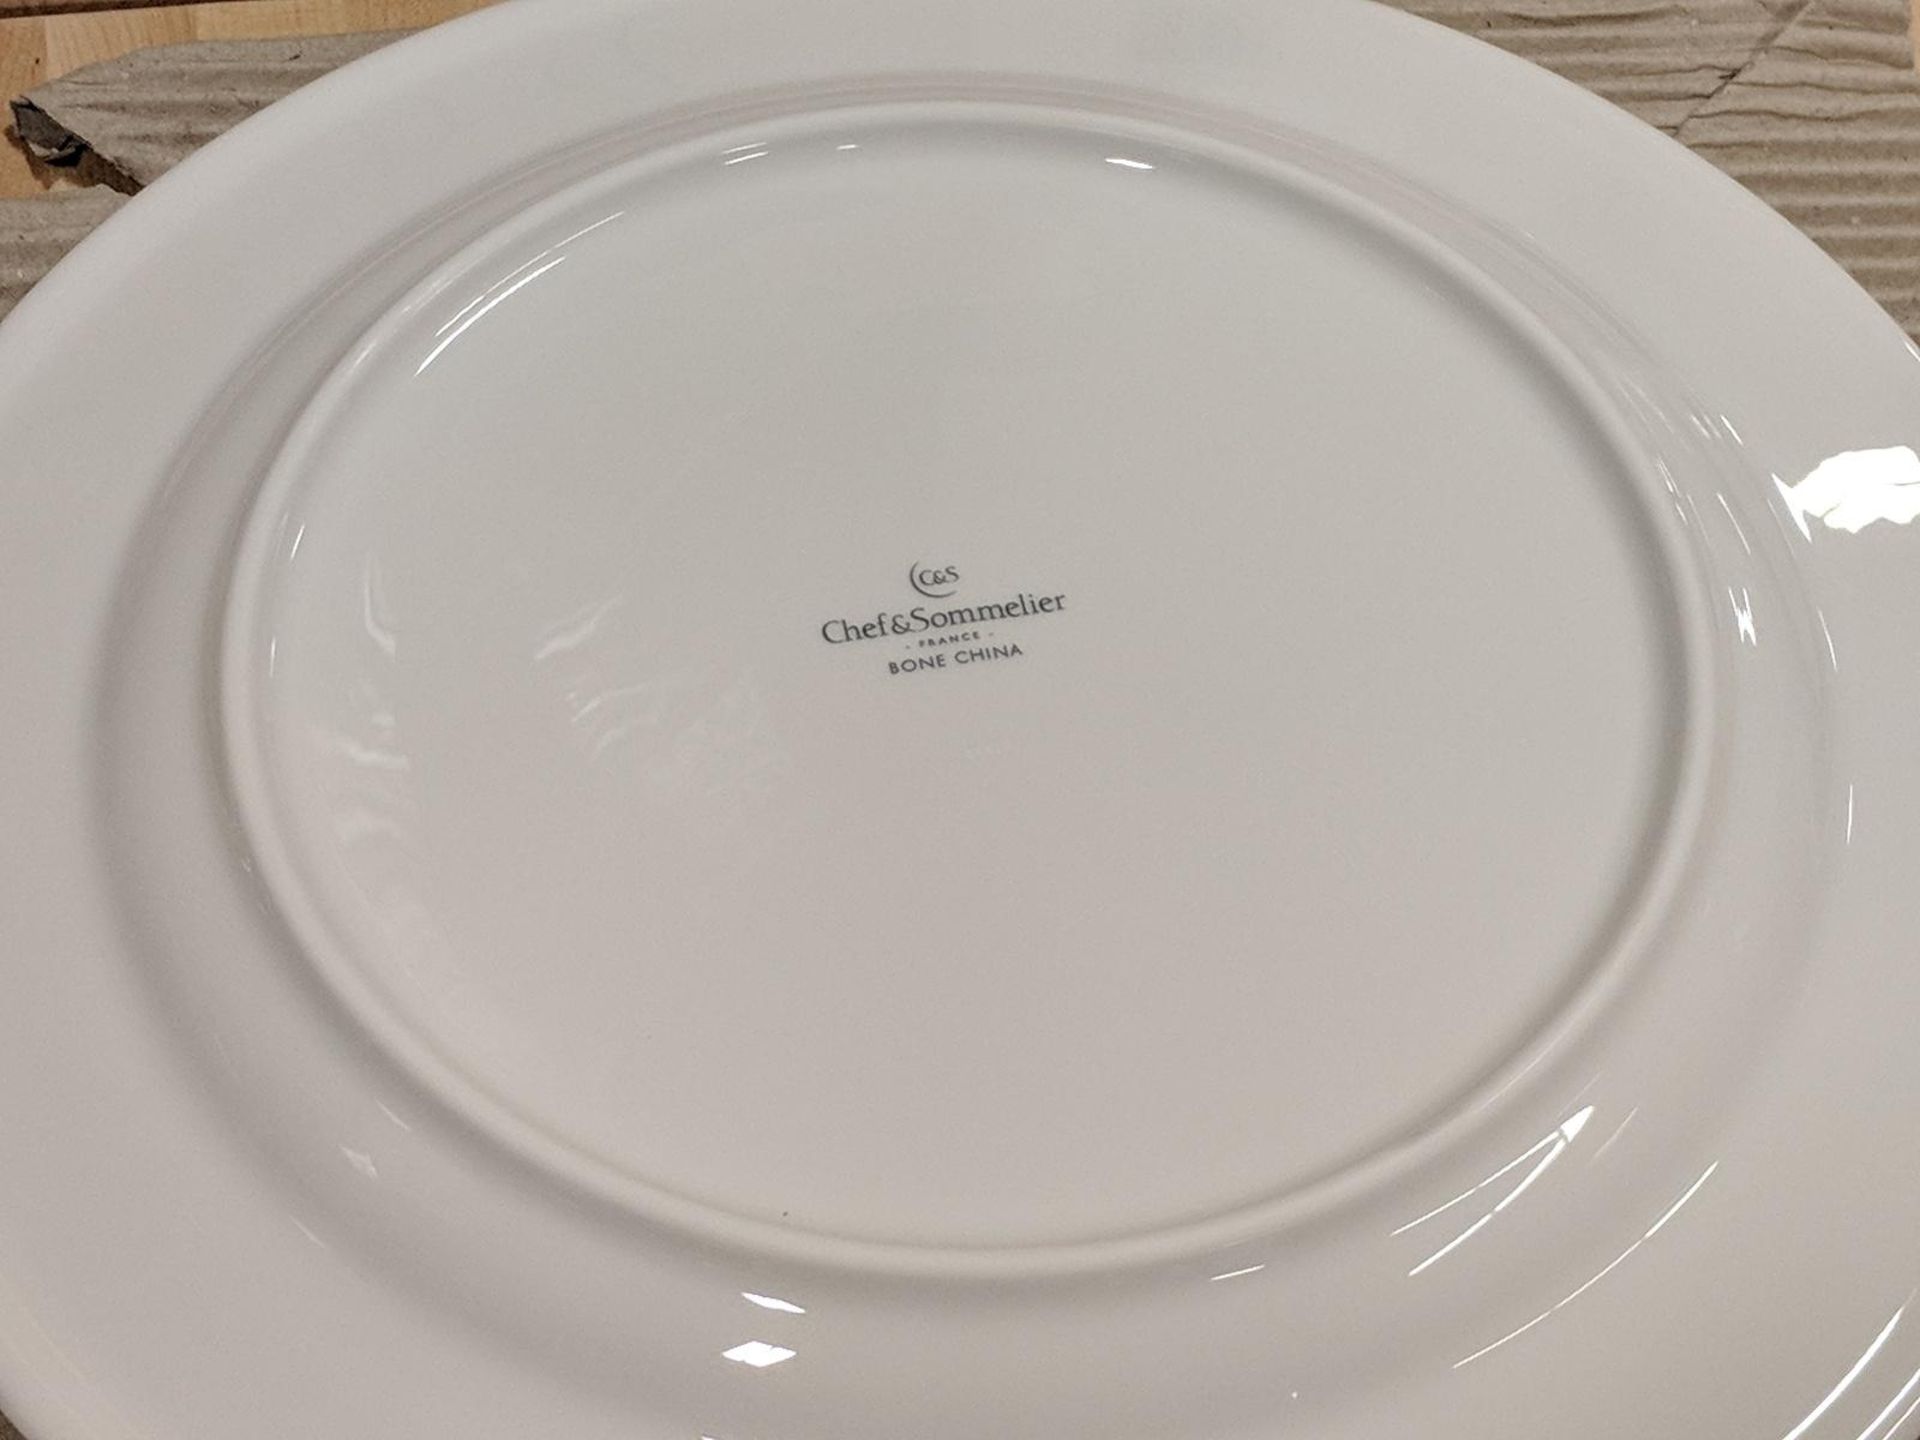 11" Infinity Dinner Plates - Lot of 12 (1 Case), Arcoroc R1002 - Image 4 of 4